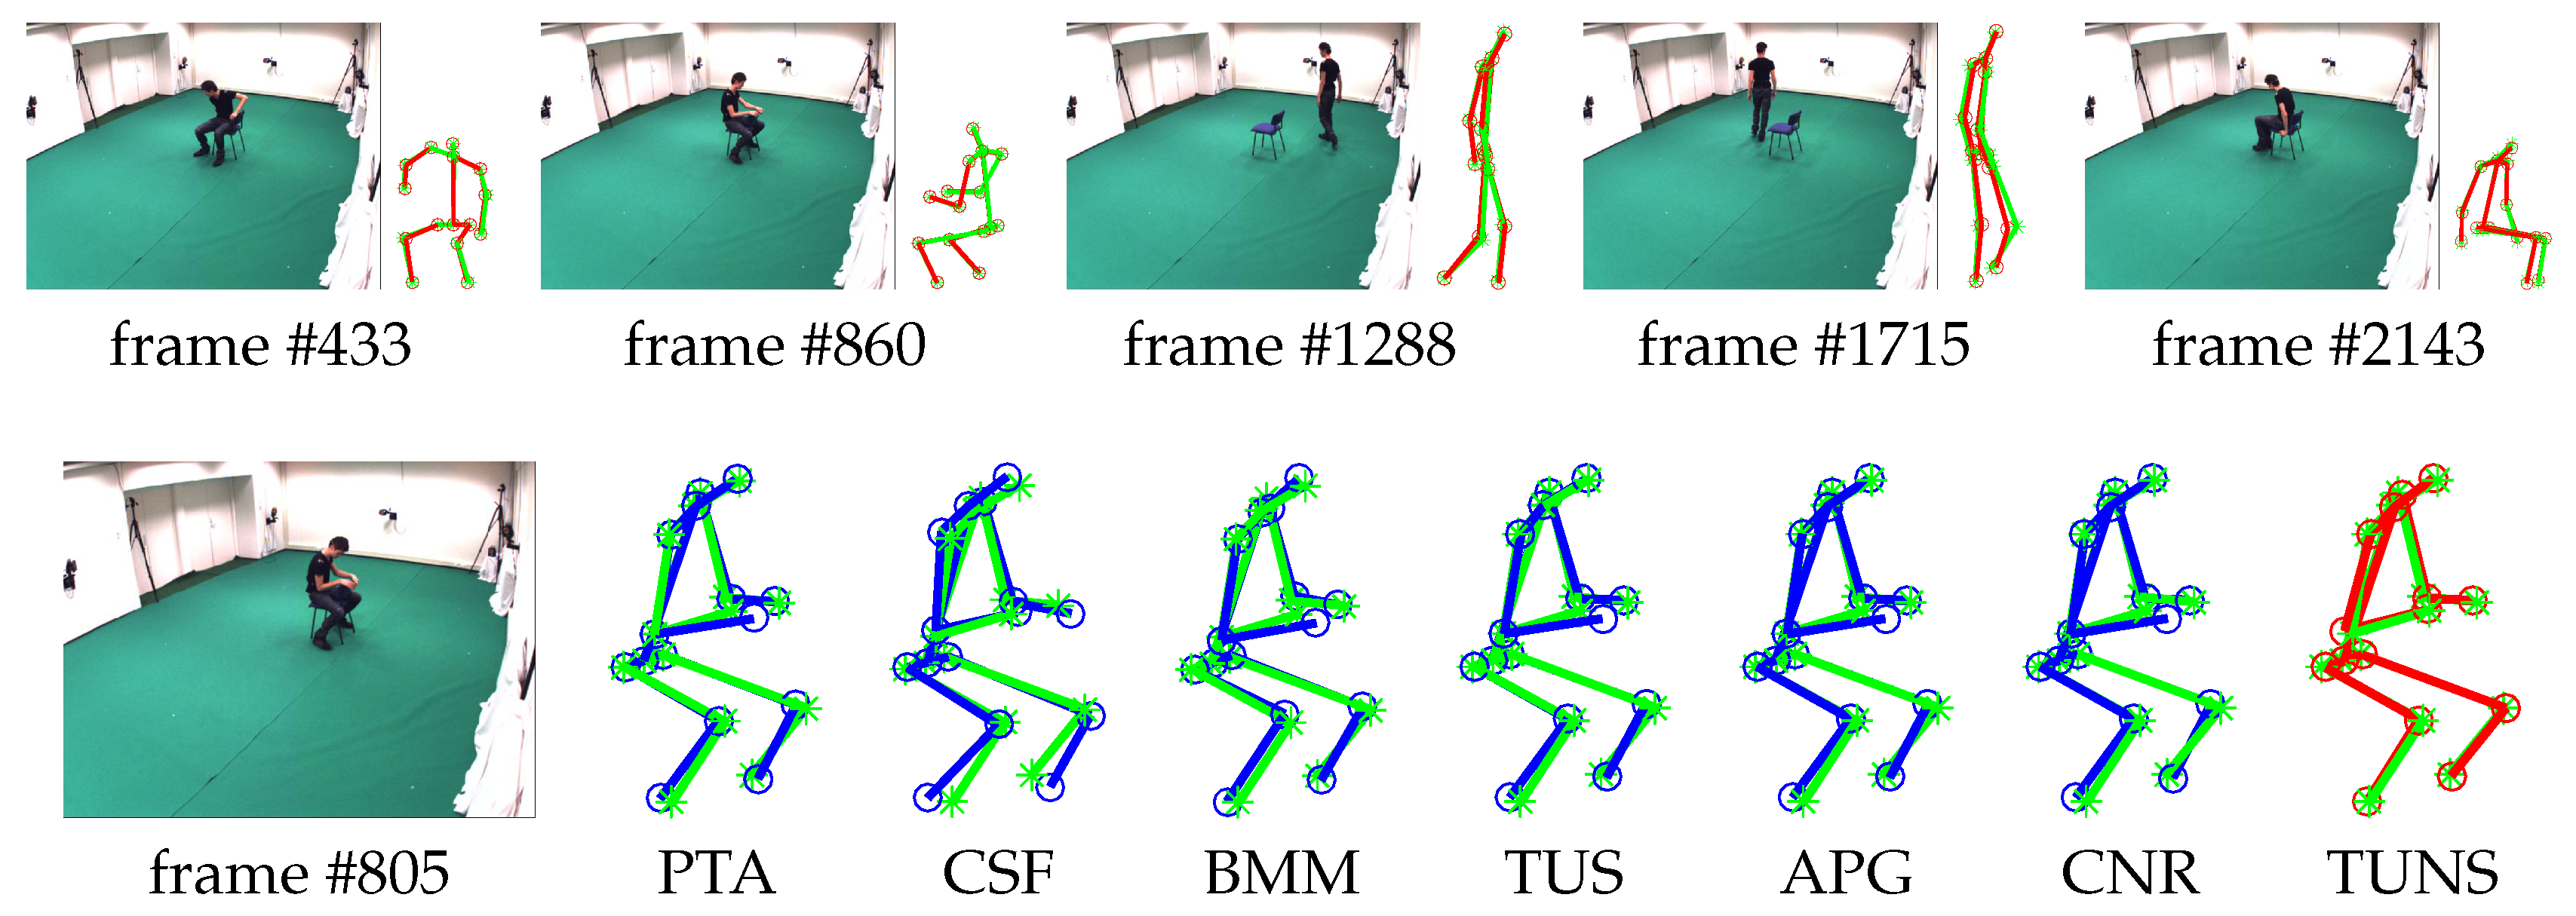 Sensors Free Full-Text Capturing Complex 3D Human Motions with Kernelized Low-Rank Representation from Monocular RGB Camera